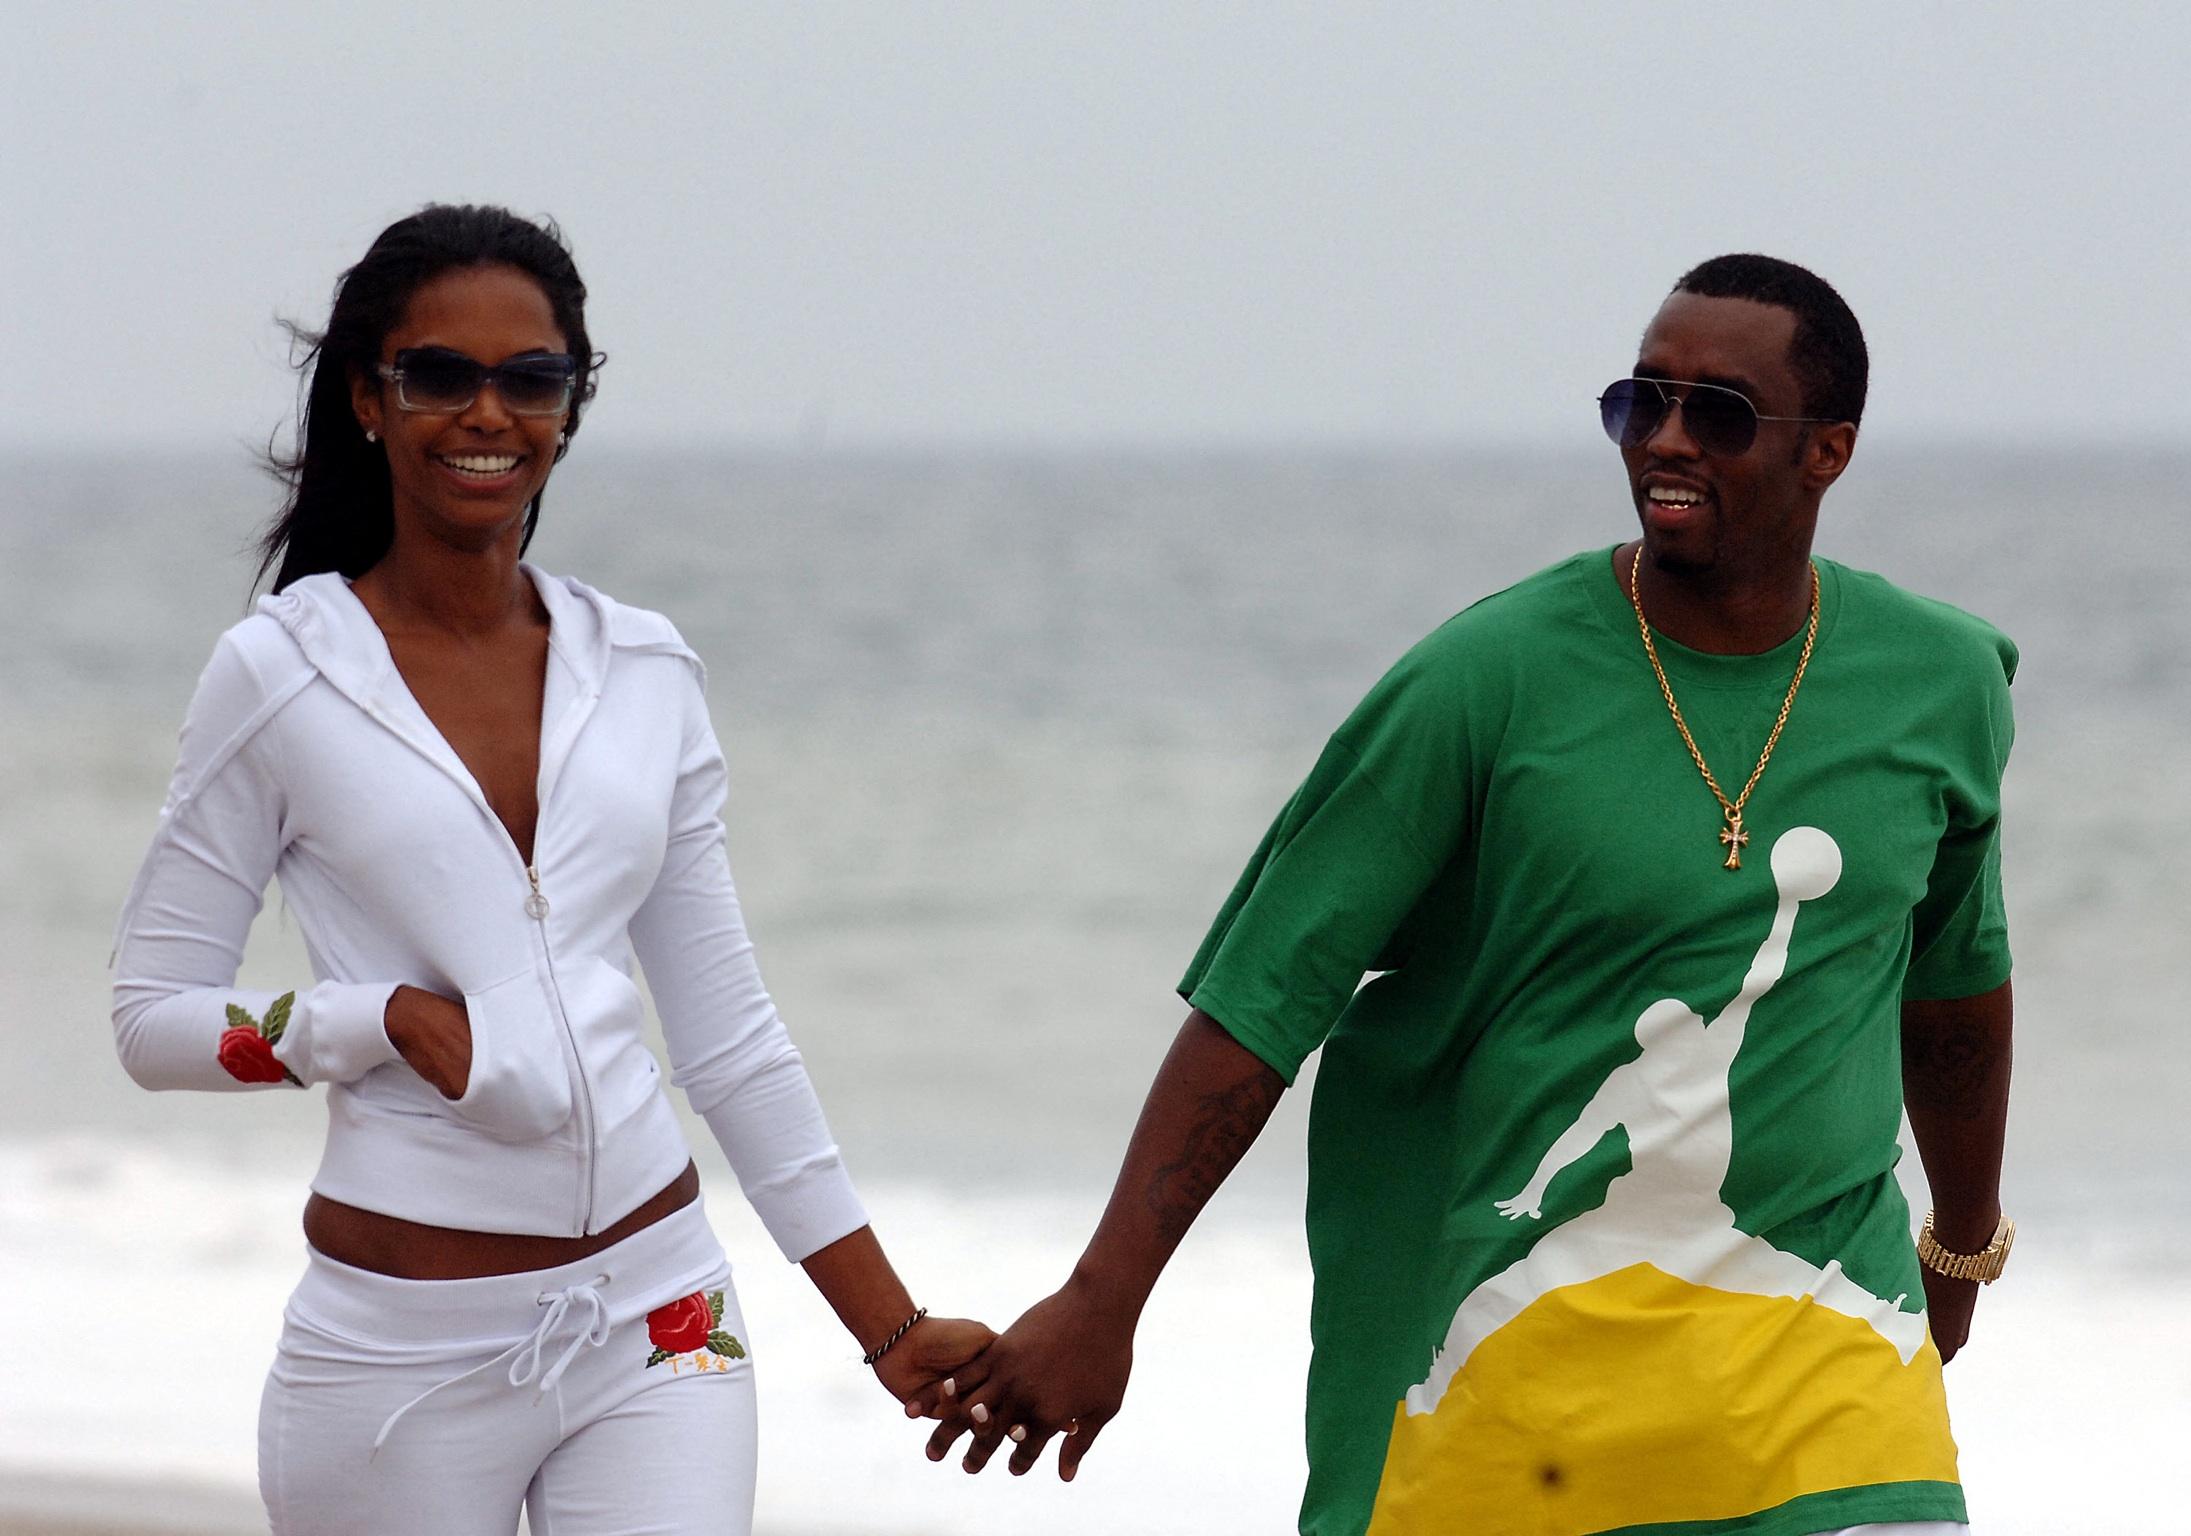 Sean Diddy and Kim Porter are seen in this June 2006 (file) photo pictured on Carbon beach in Malibu, CA